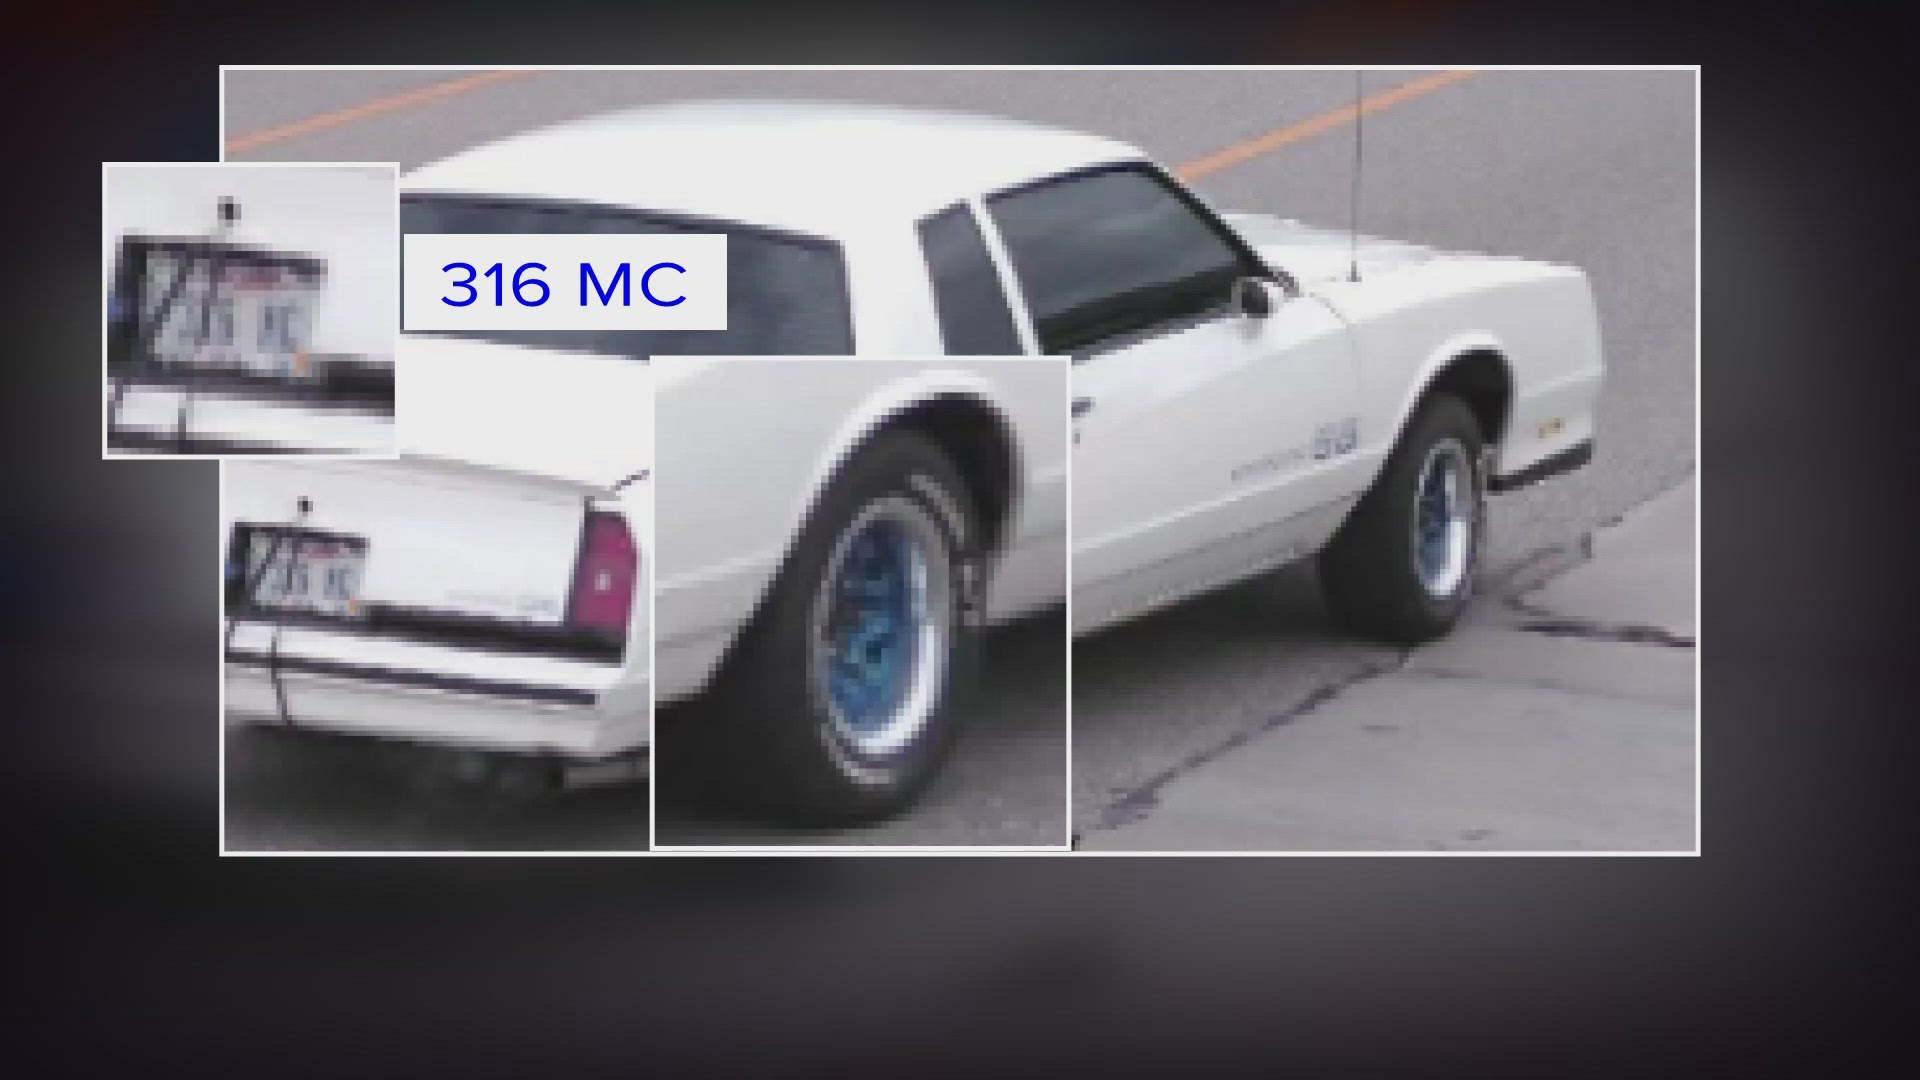 Cleveland police say a 1983 Chevrolet Monte Carlo struck the victim and dragged him several feet in the 18100 block of Euclid Avenue.